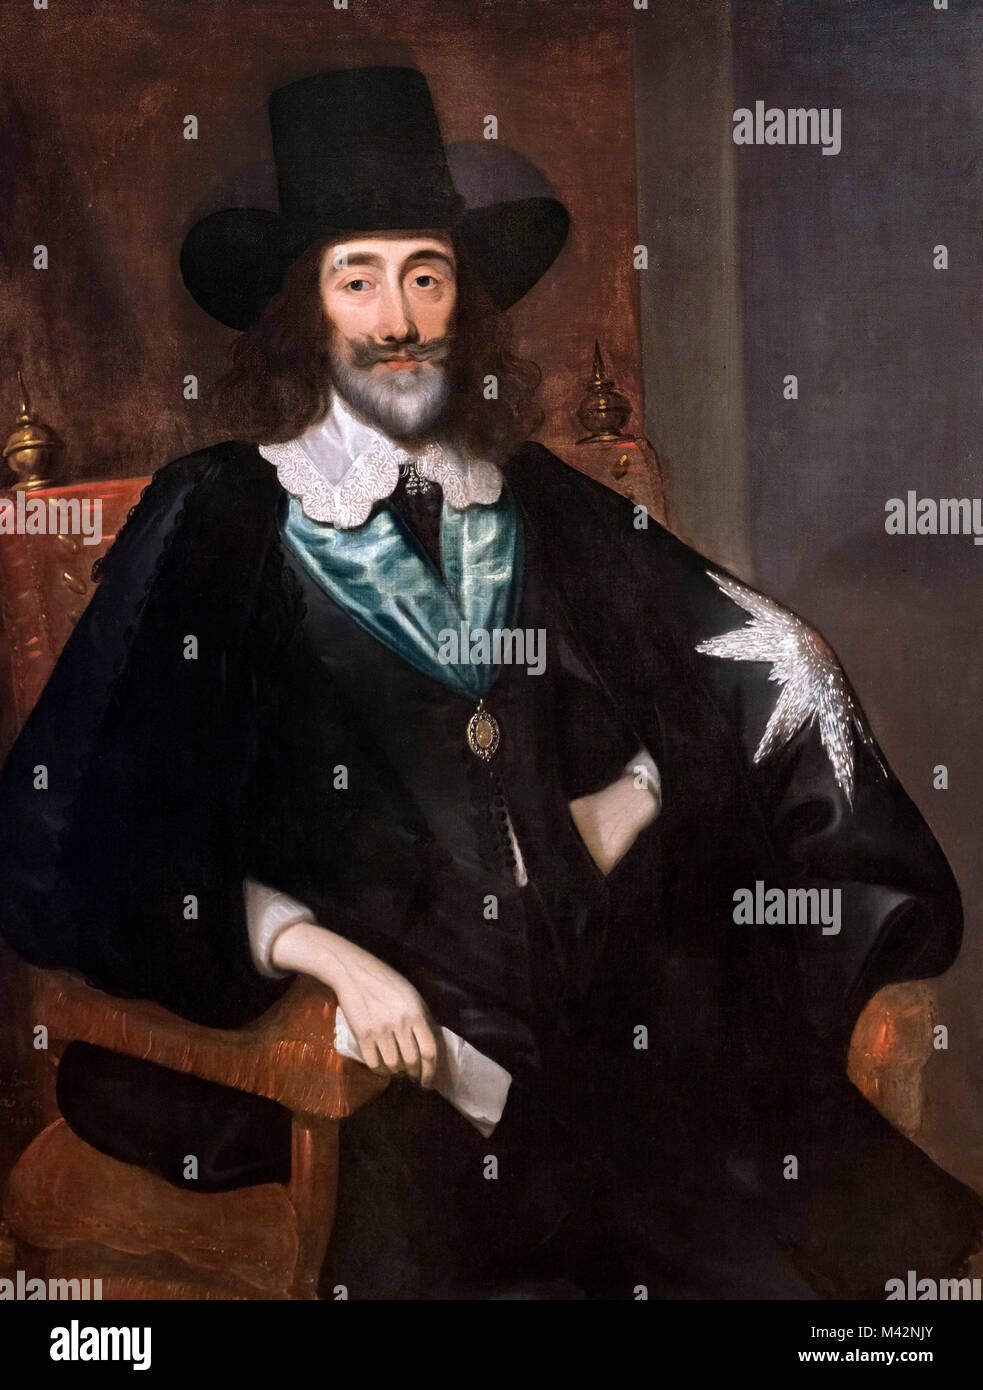 Charles I at his Trial by Edward Bower, oil on canvas, 1649. Portrait of King Charles I of England (1600-1649) at his trial in the Great Hall of the Palace of Westminster. Stock Photo